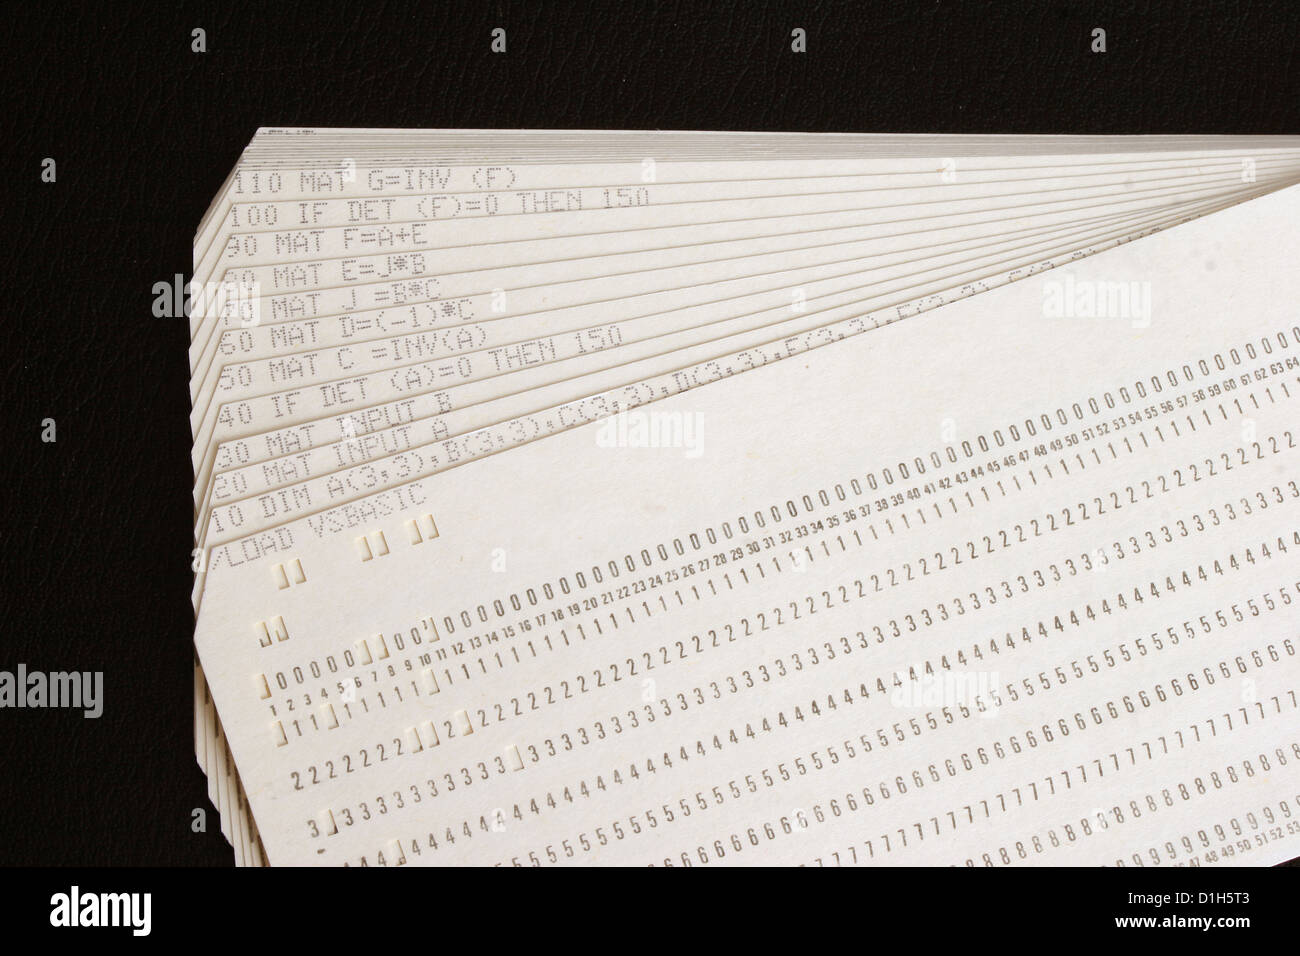 November 2012 - A set of computer punch cards from the 1970's, way before the invention of the key board, mouse and screen. Stock Photo